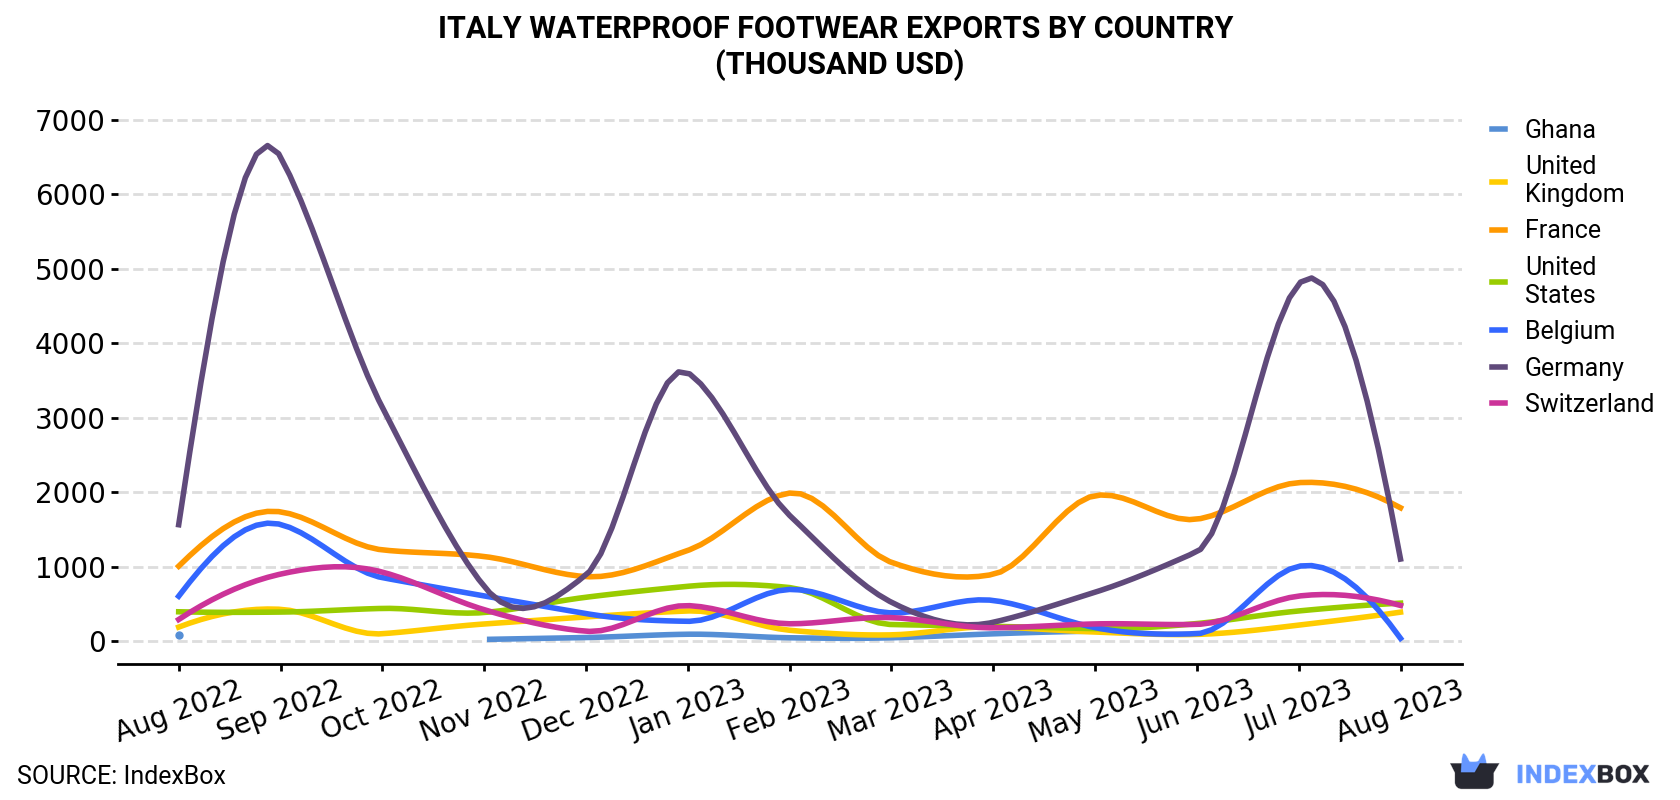 Italy Waterproof Footwear Exports By Country (Thousand USD)